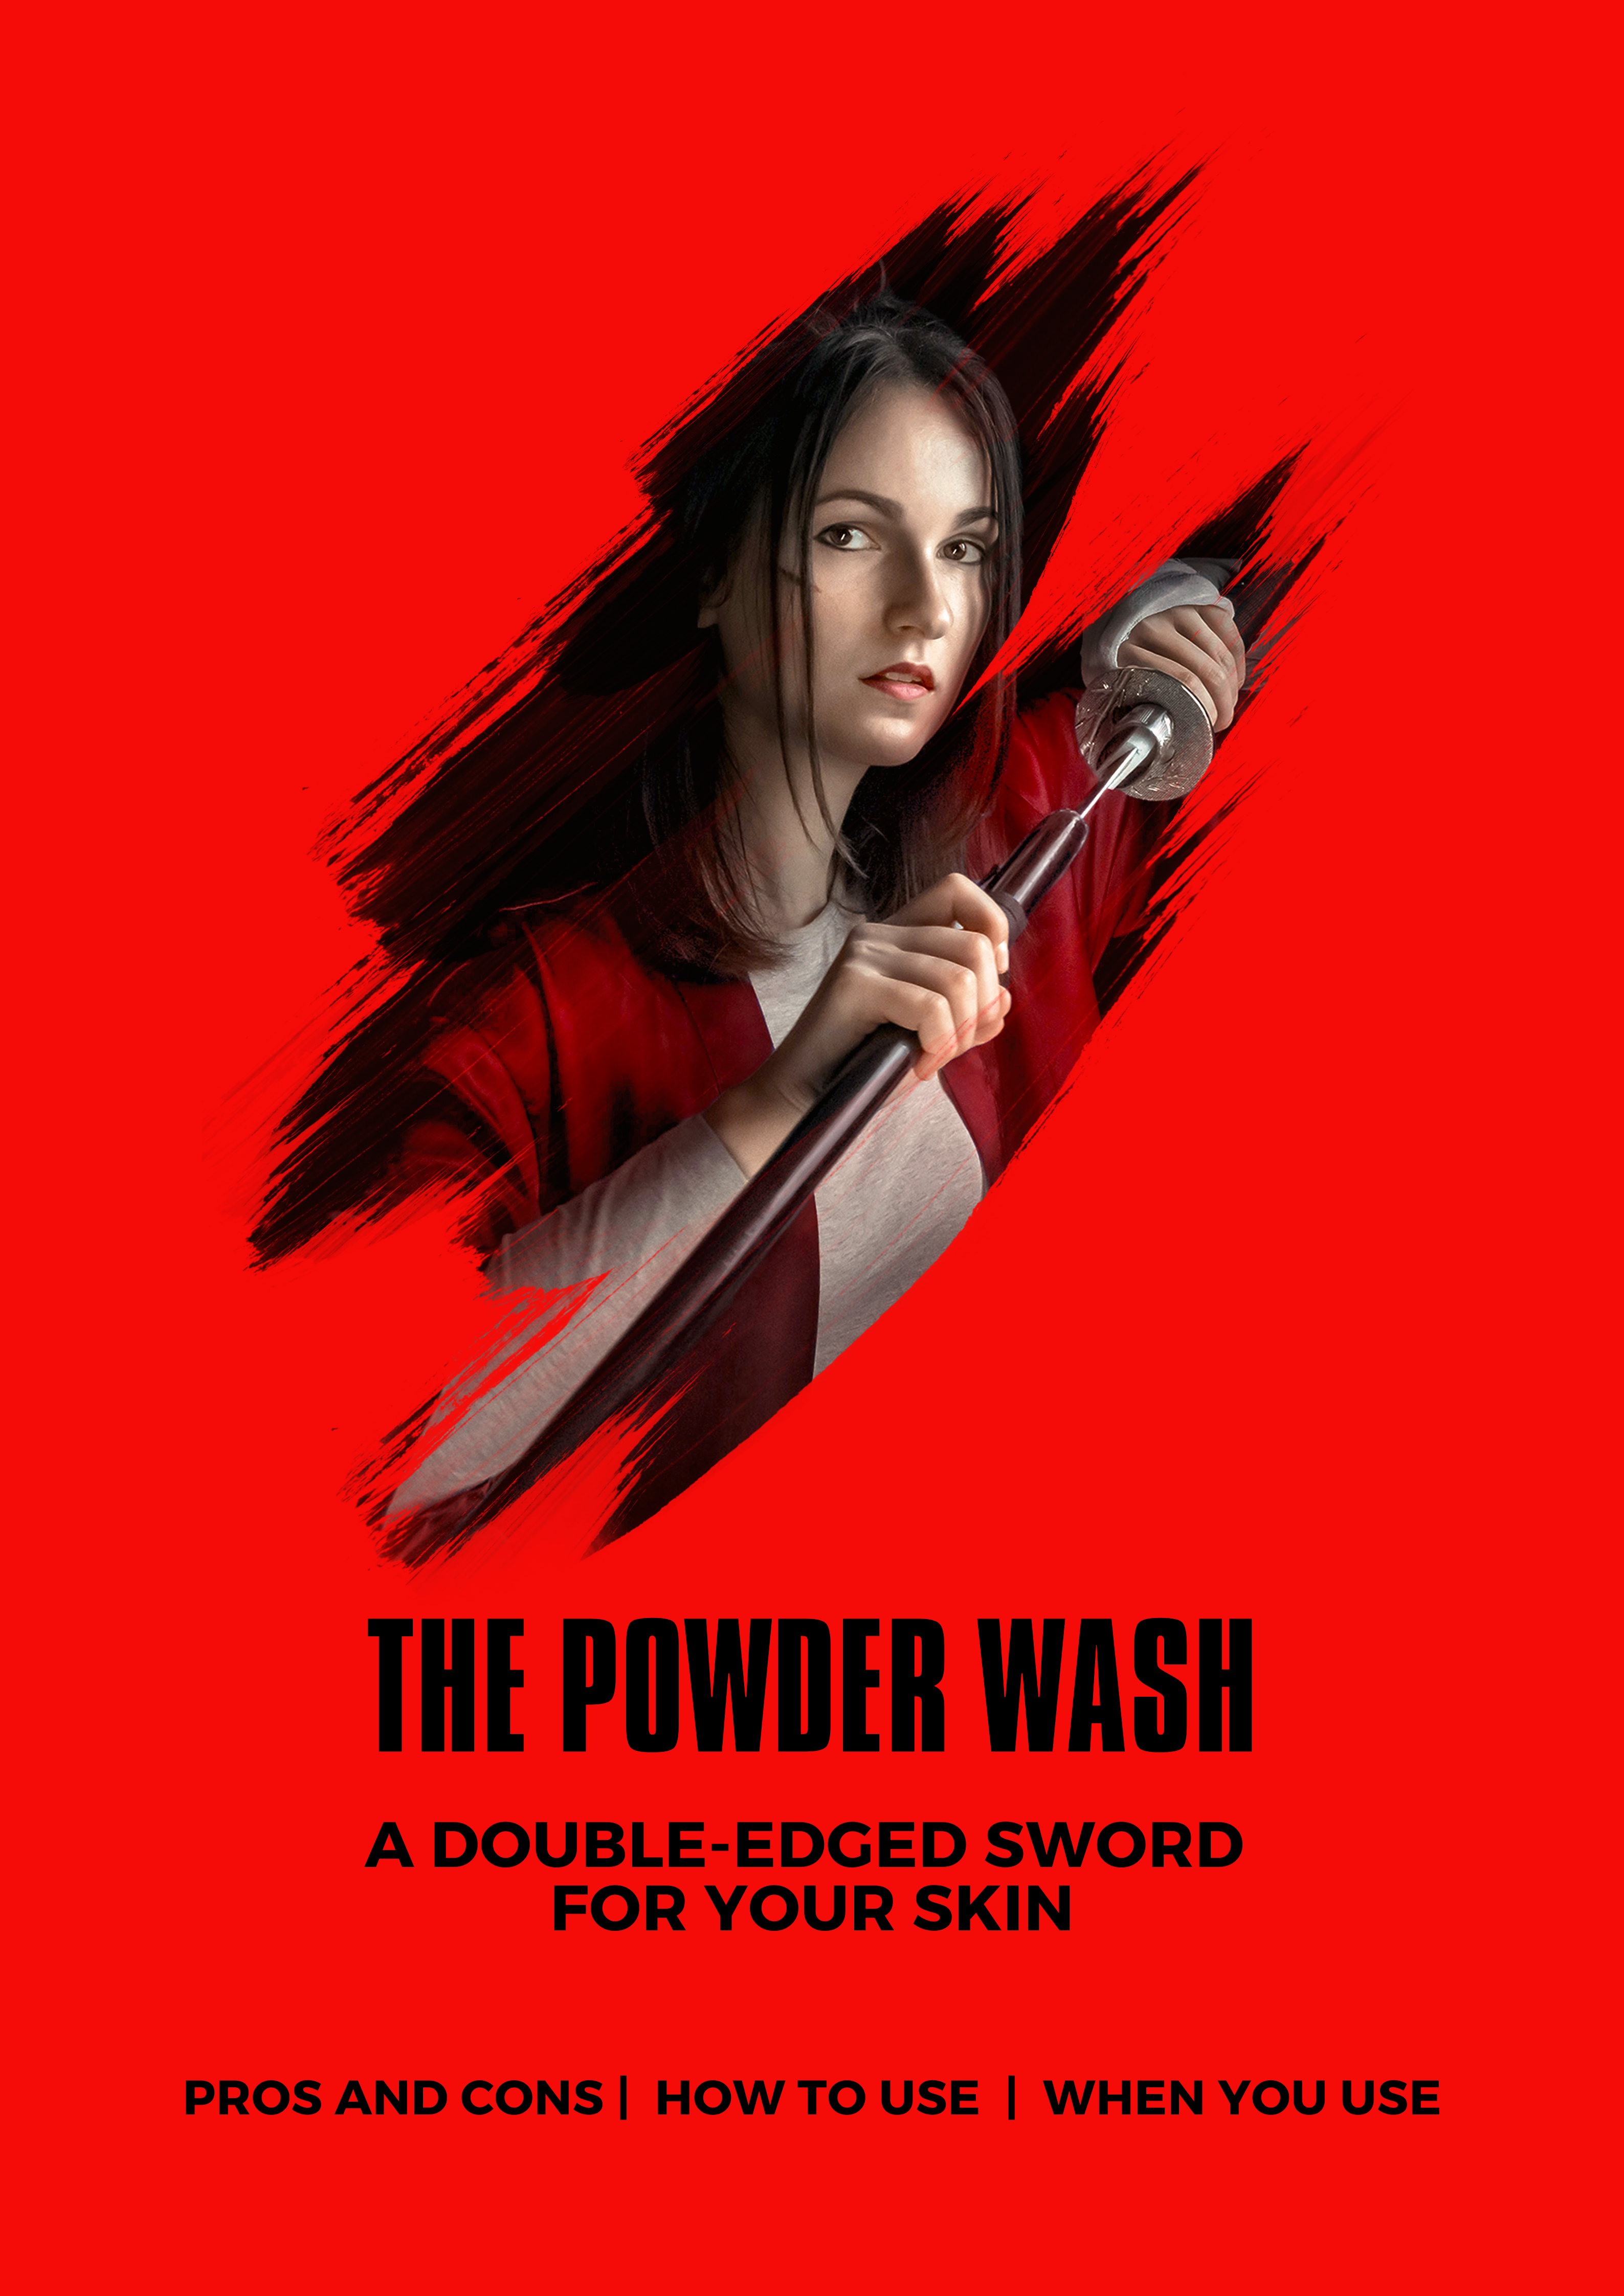 The Powder Wash: A Double-Edged Sword for Your Skin!